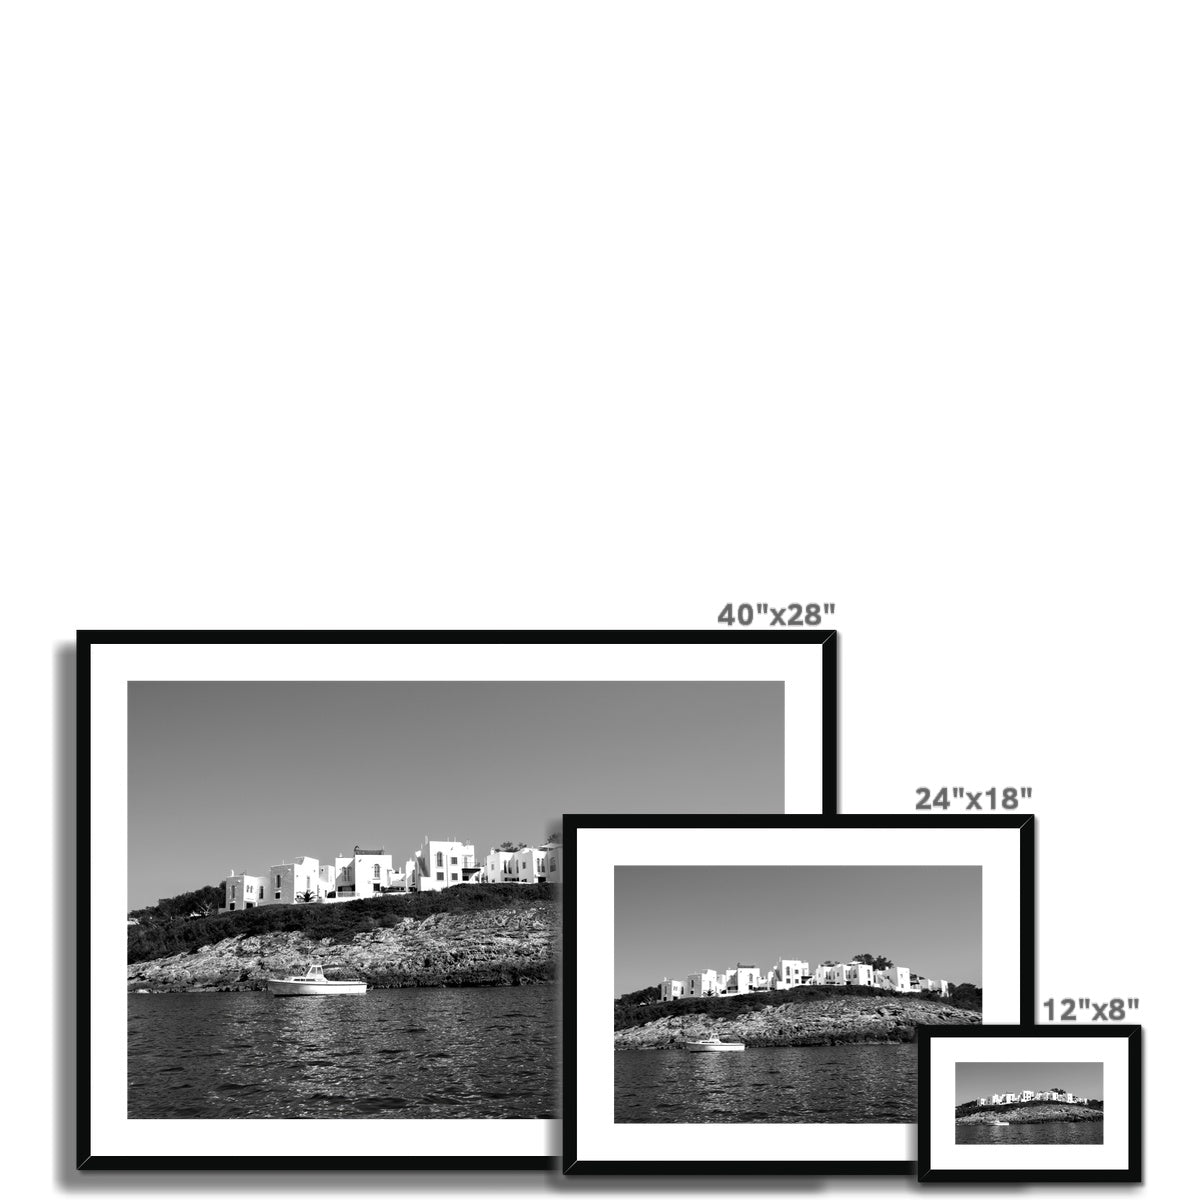 Houses of Portinatx Framed & Mounted Print